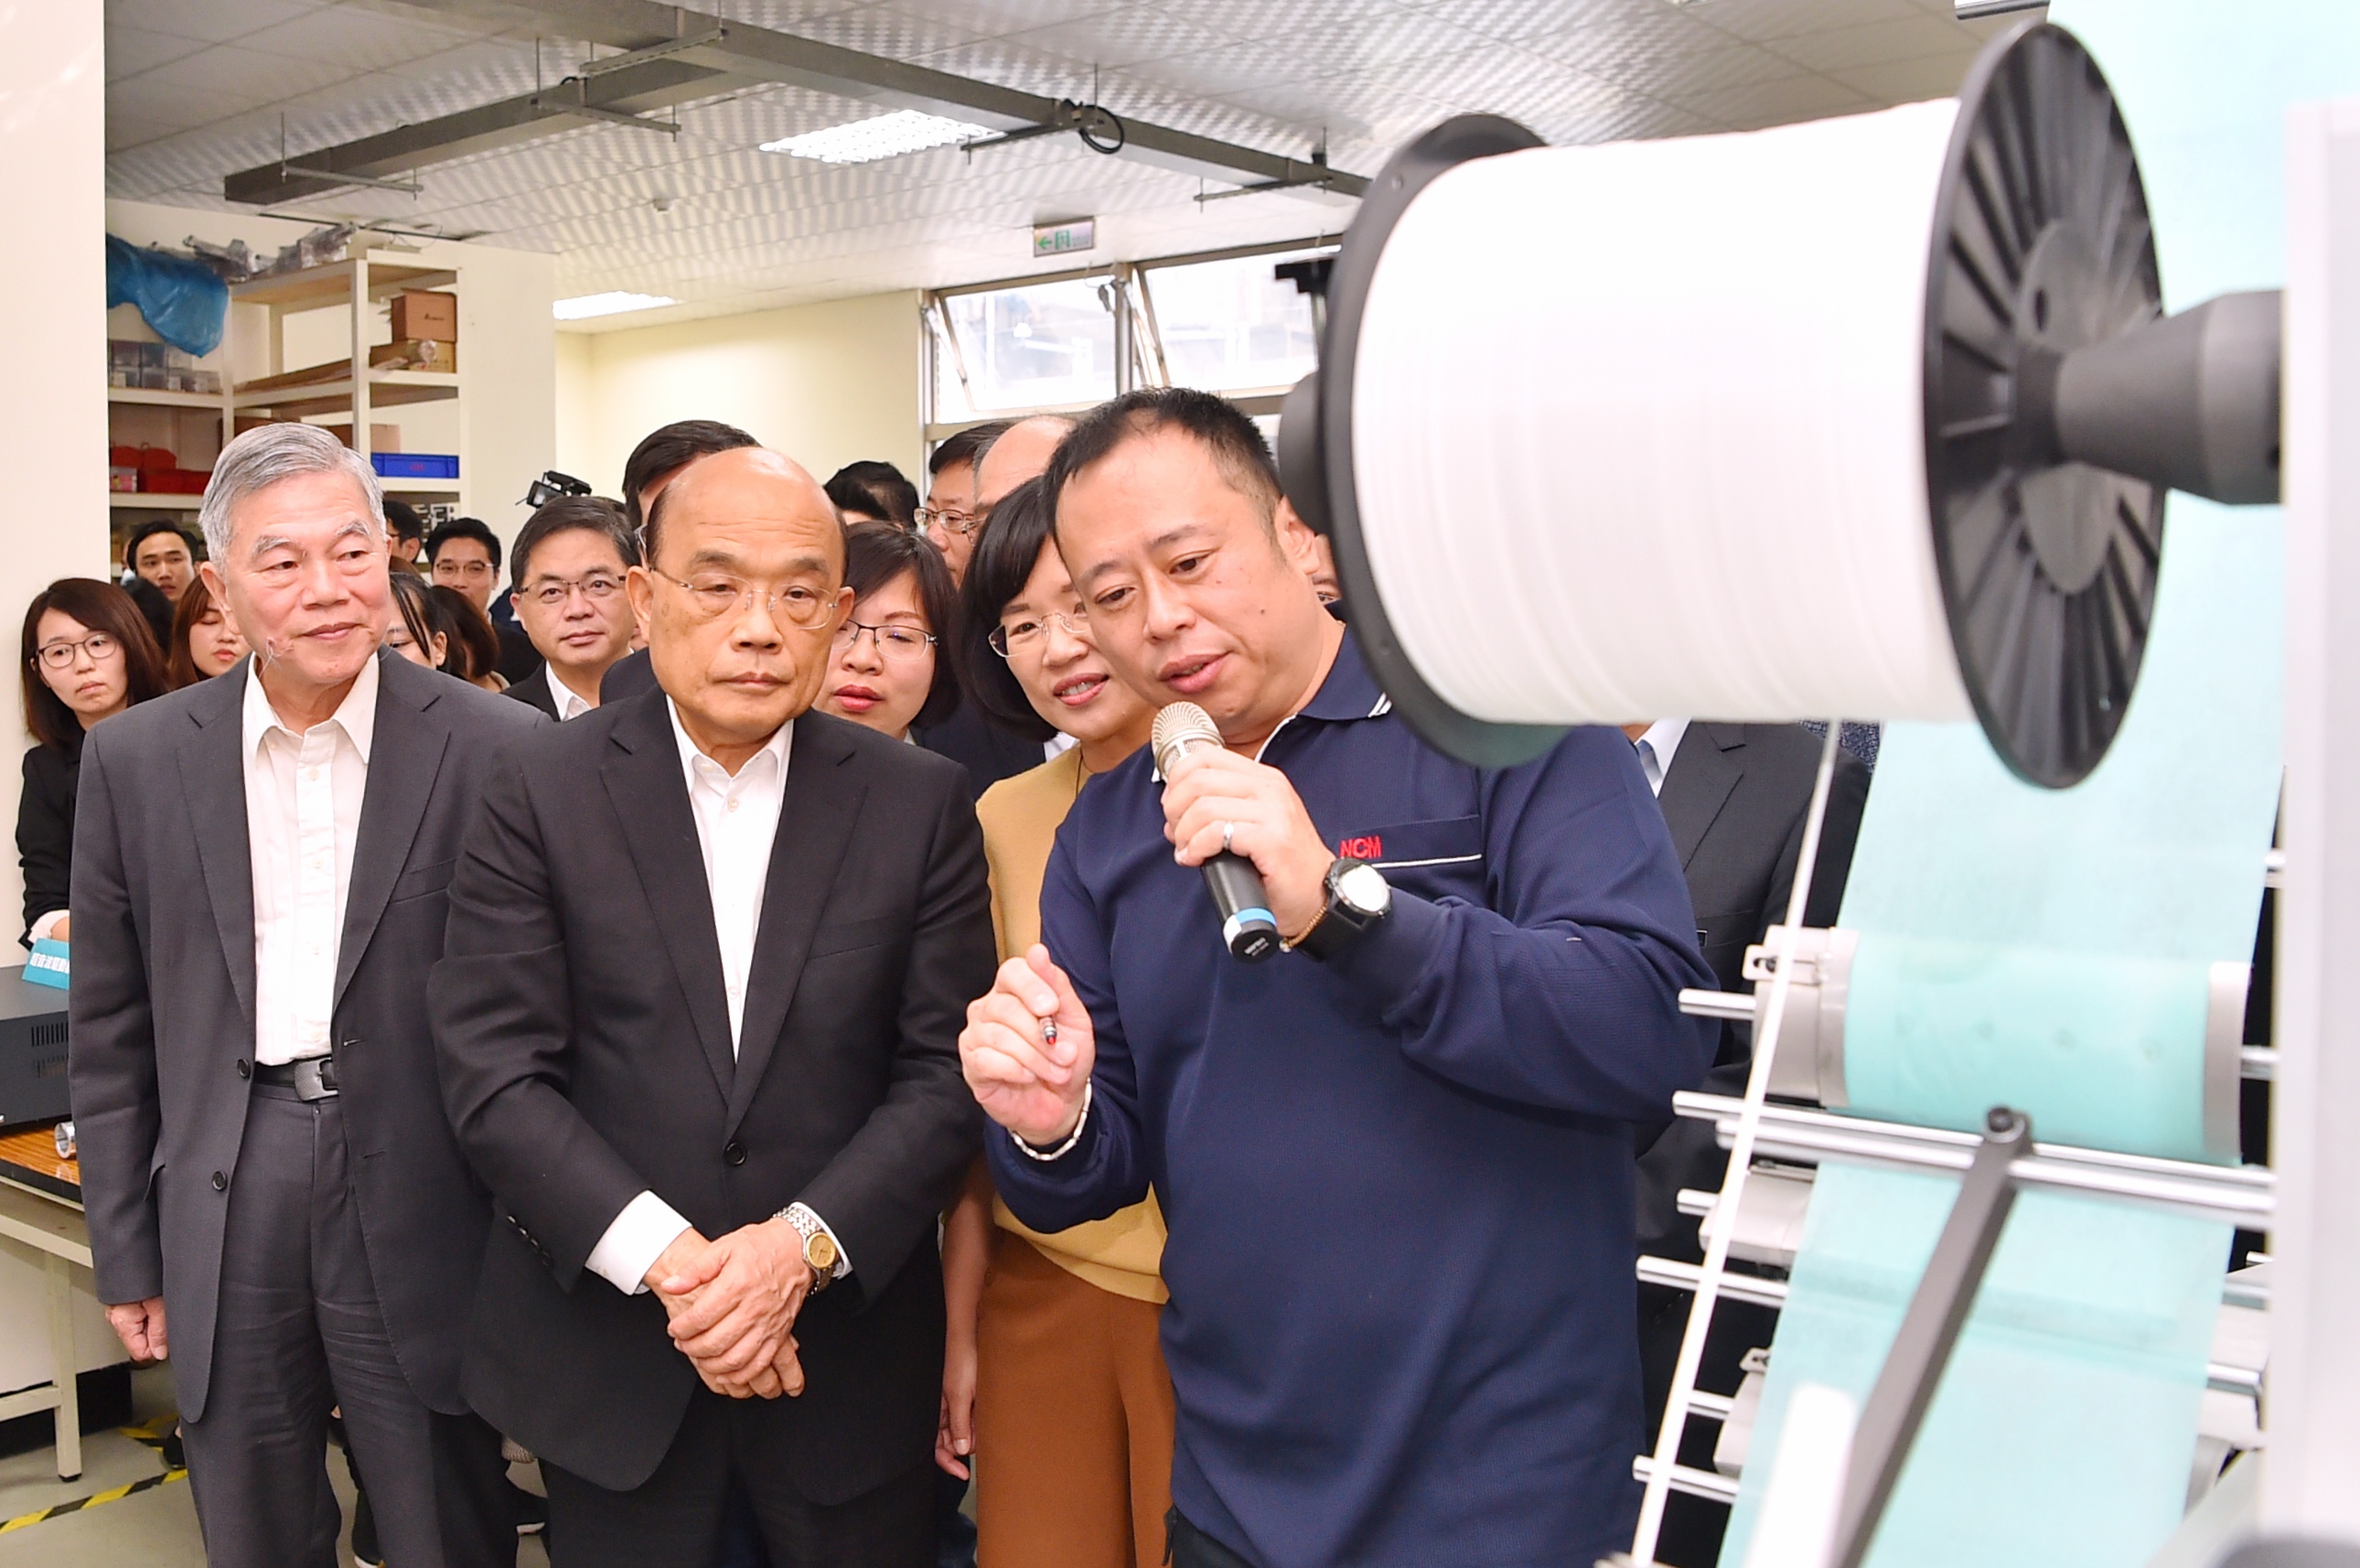 Premier Su, Tseng-chang and Minister of Economic Affairs Shen, Jong-Chin inspected a new mask production line.